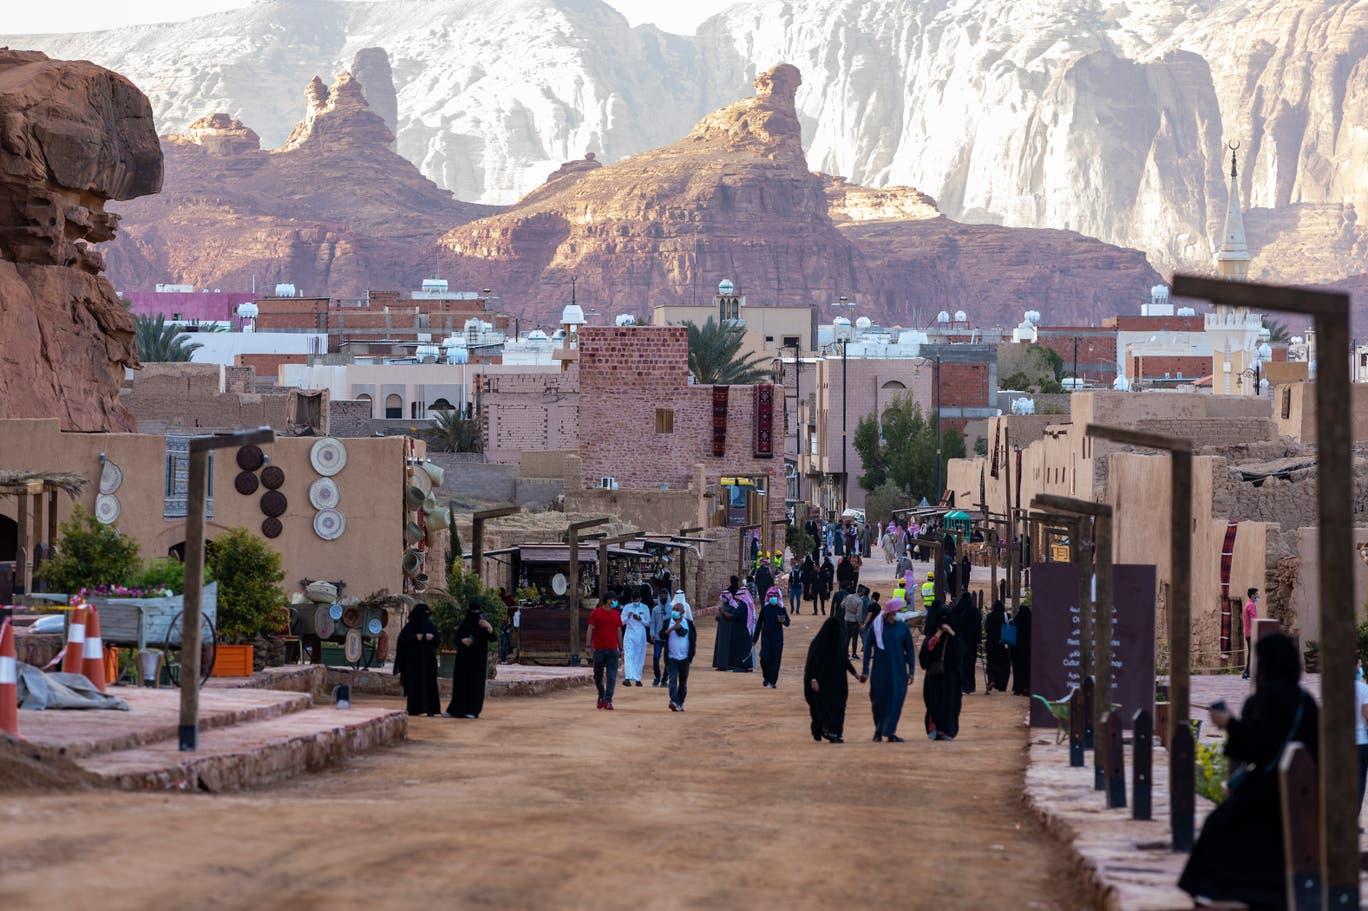 Al-Ula, a city in Saudi Arabia, was rated the top tourist destination by the World Tourism Organisation citing its natural and human heritage